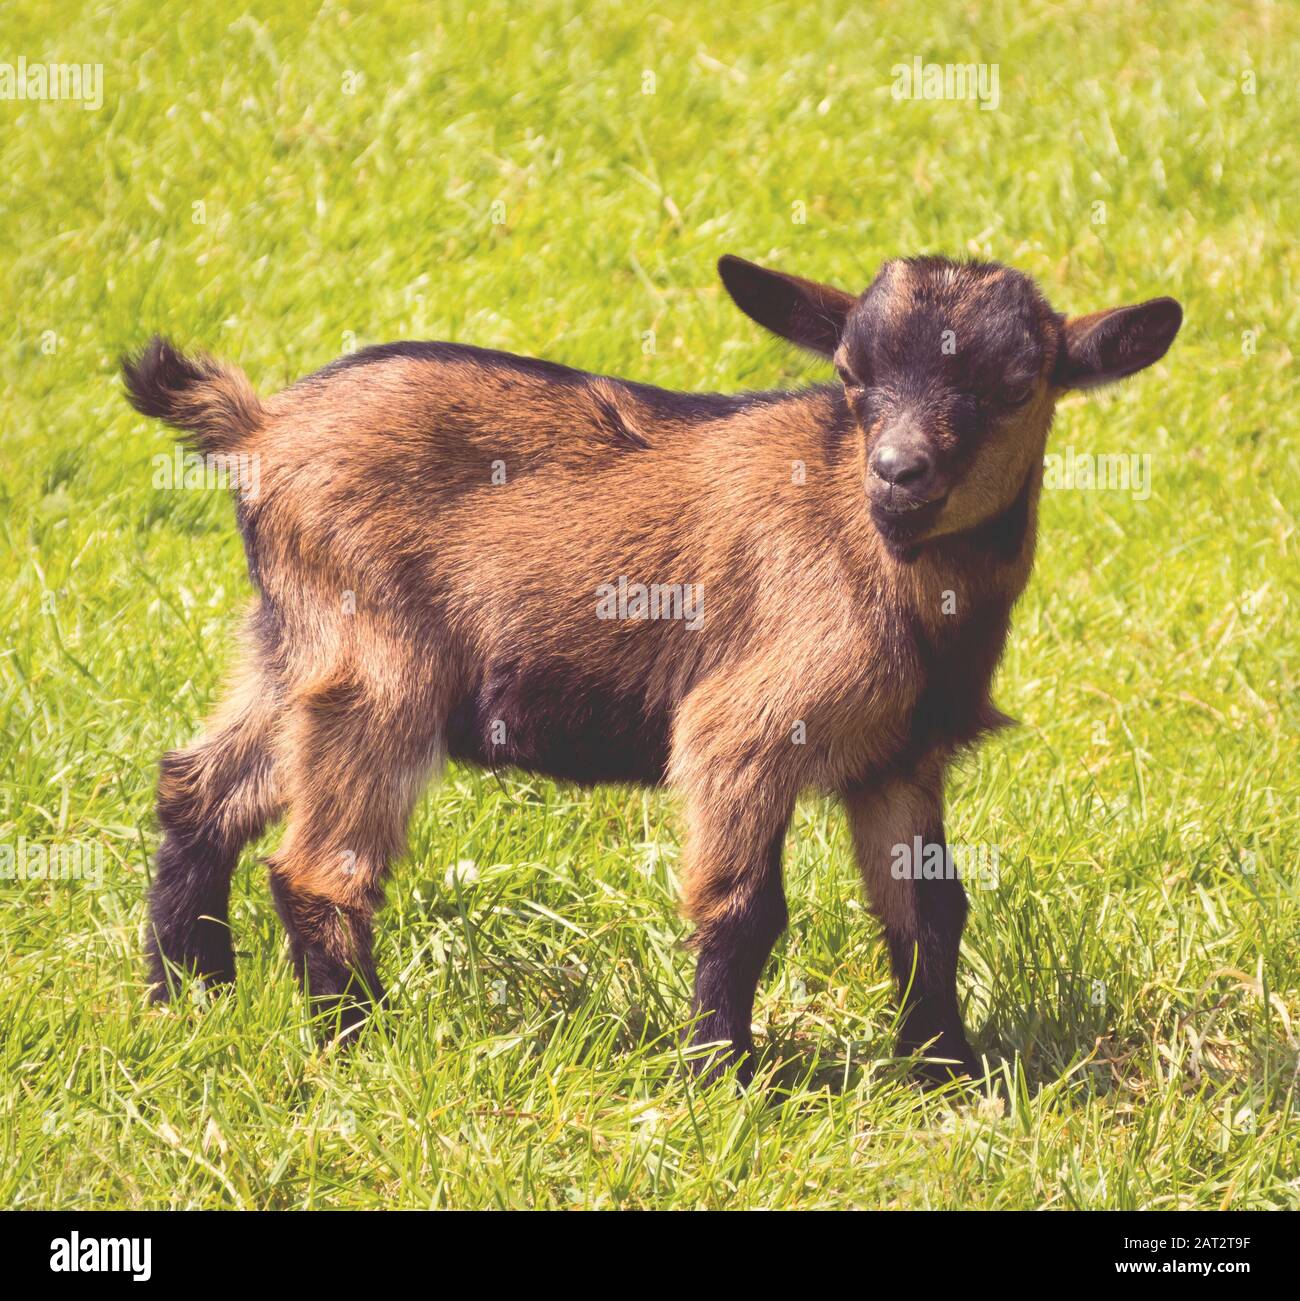 Young brown goat in grass field, side view, head turned towards camera Stock Photo